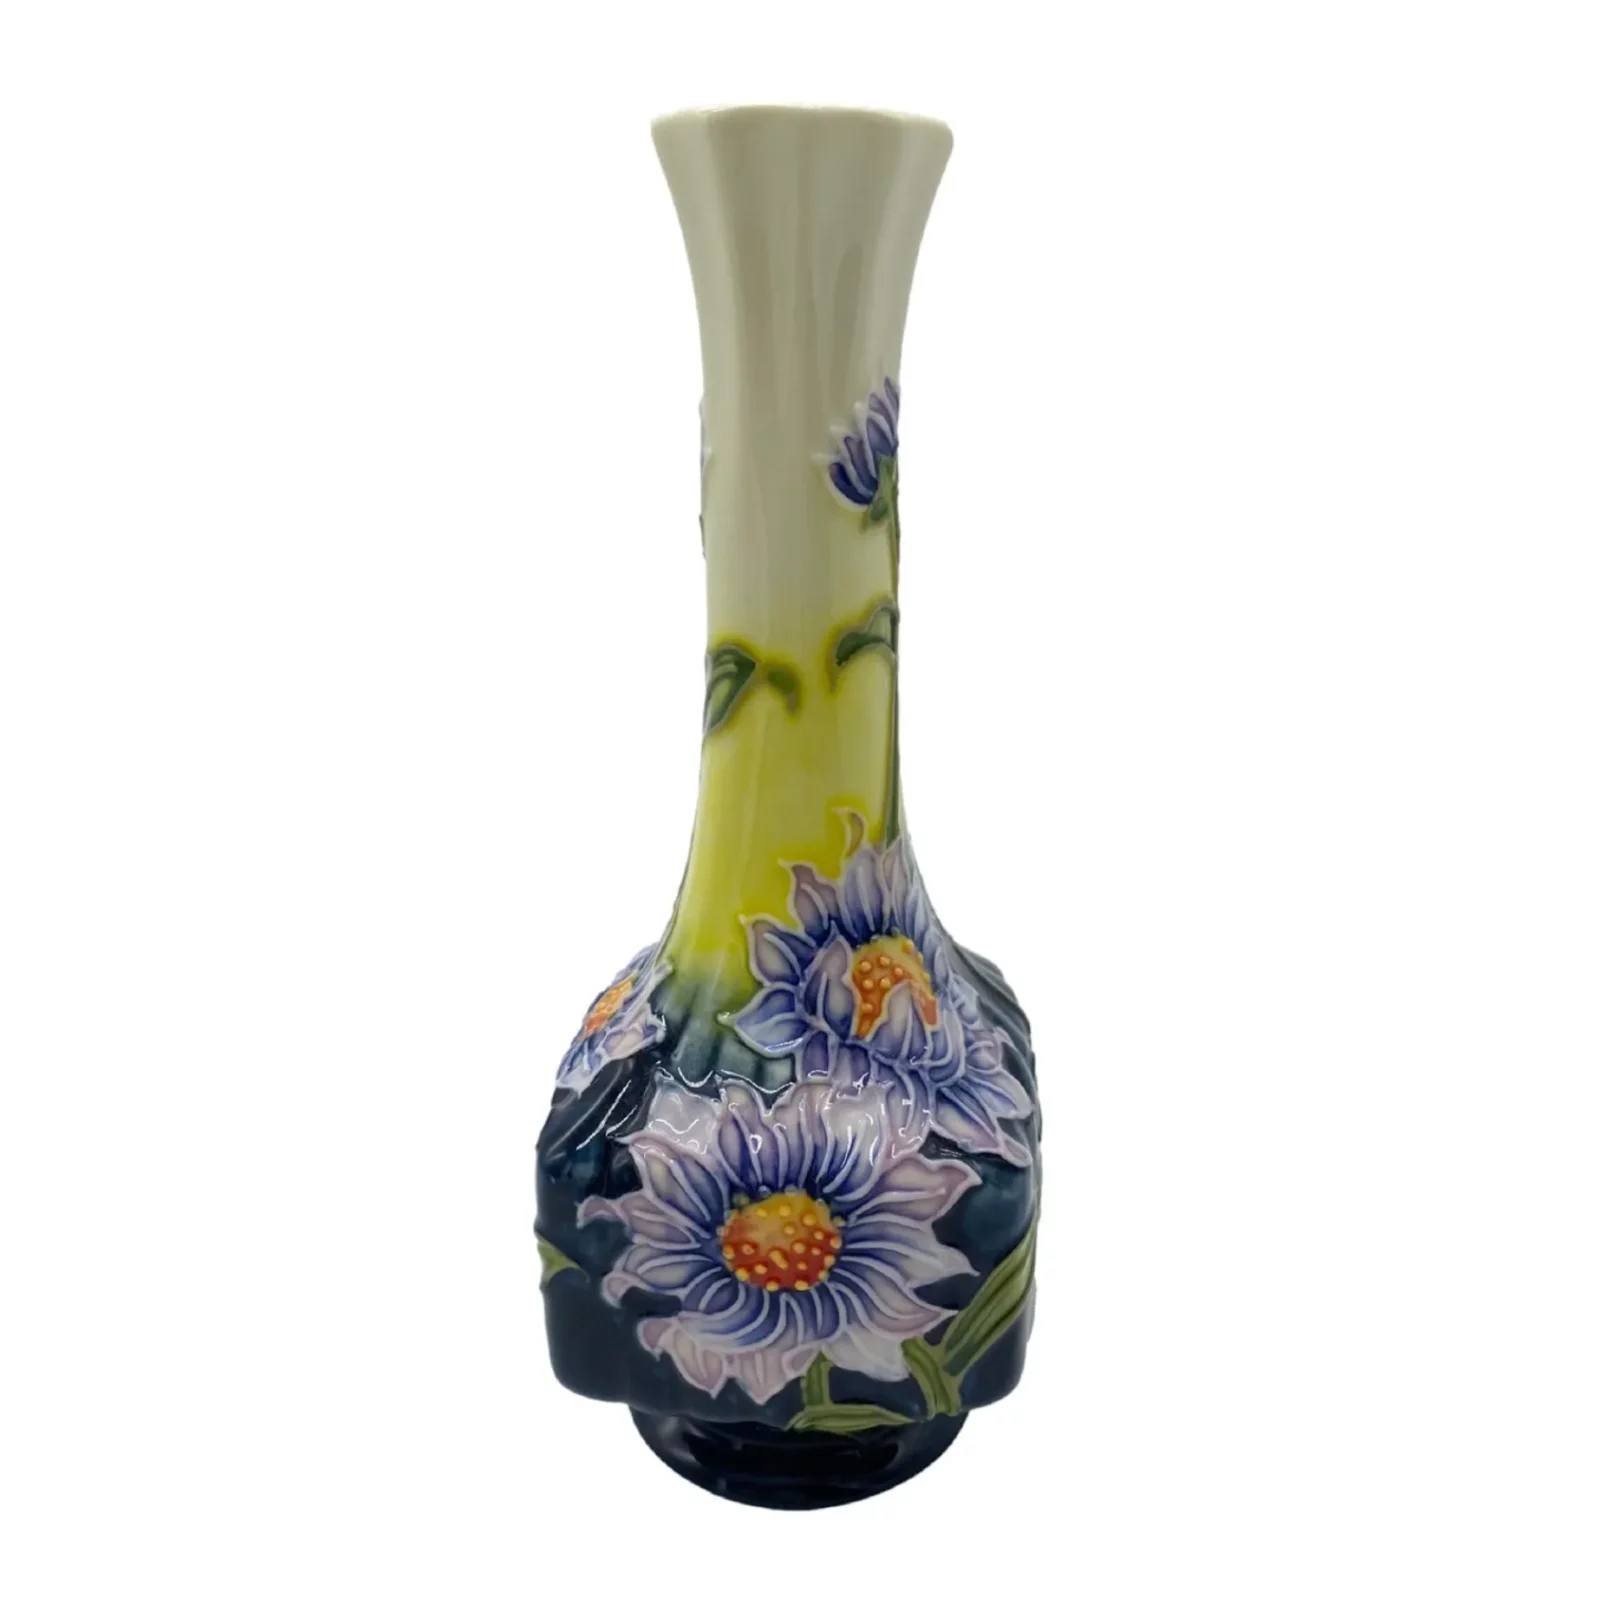 small vase bud shape with long stem lilac daisy pattern as decoration bright vibrant art deco